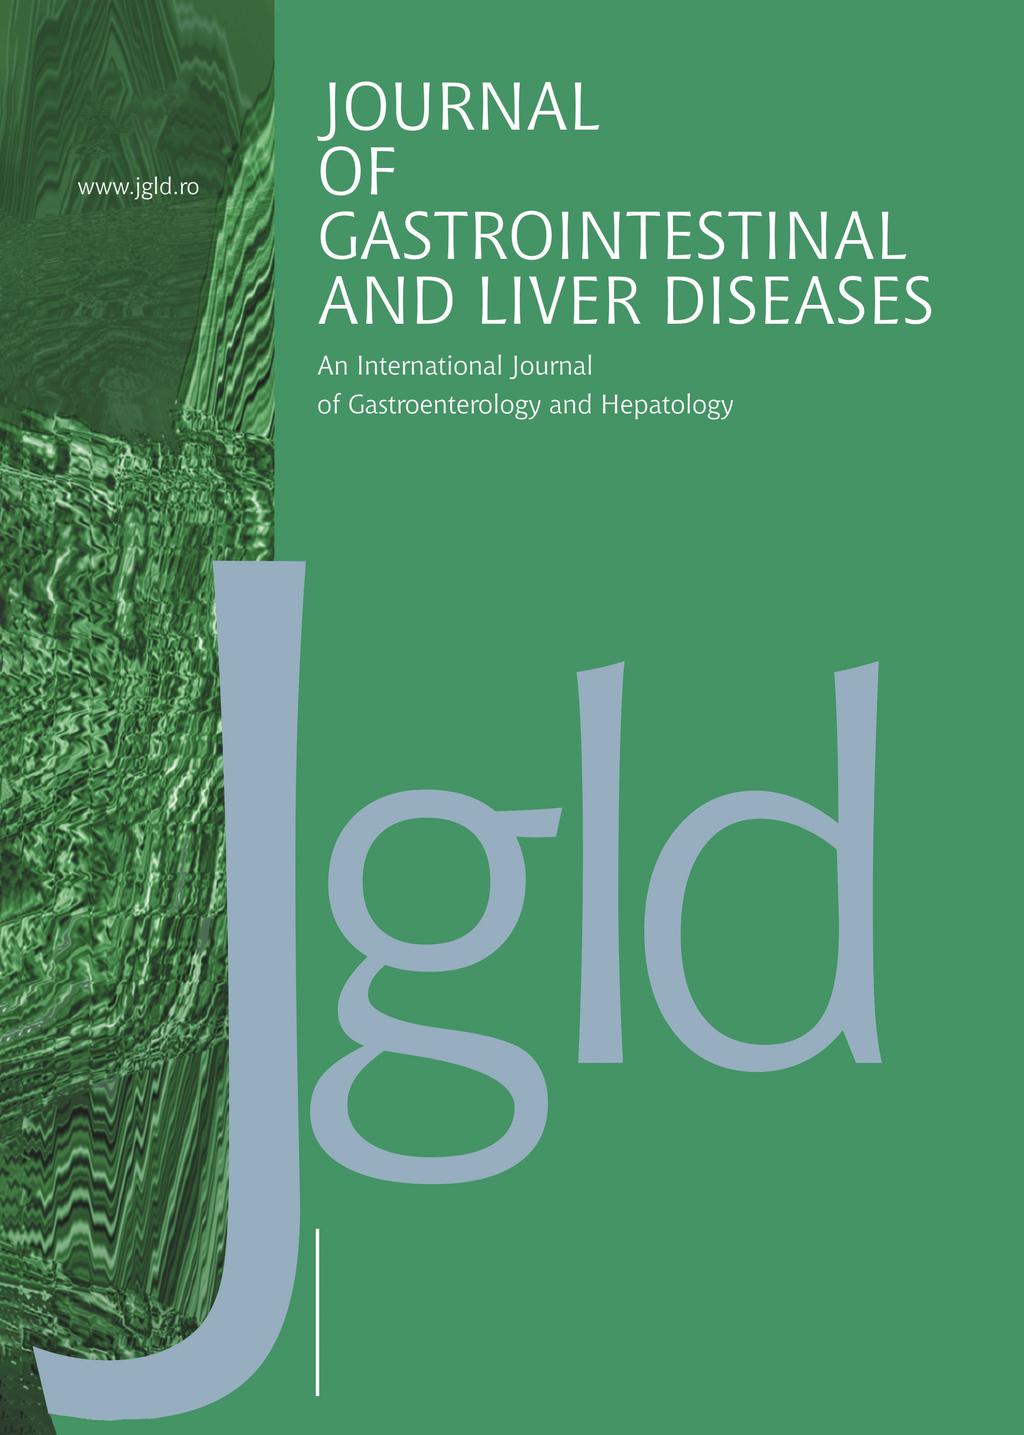 JOURNAL OF GASTROINTESTINAL AND LIVER DISEASES - 06, Volume 6, Supplement 3 Volume 6 Supplement 3 07 Medical University Press Cluj-Napoca, Romania Cover design: